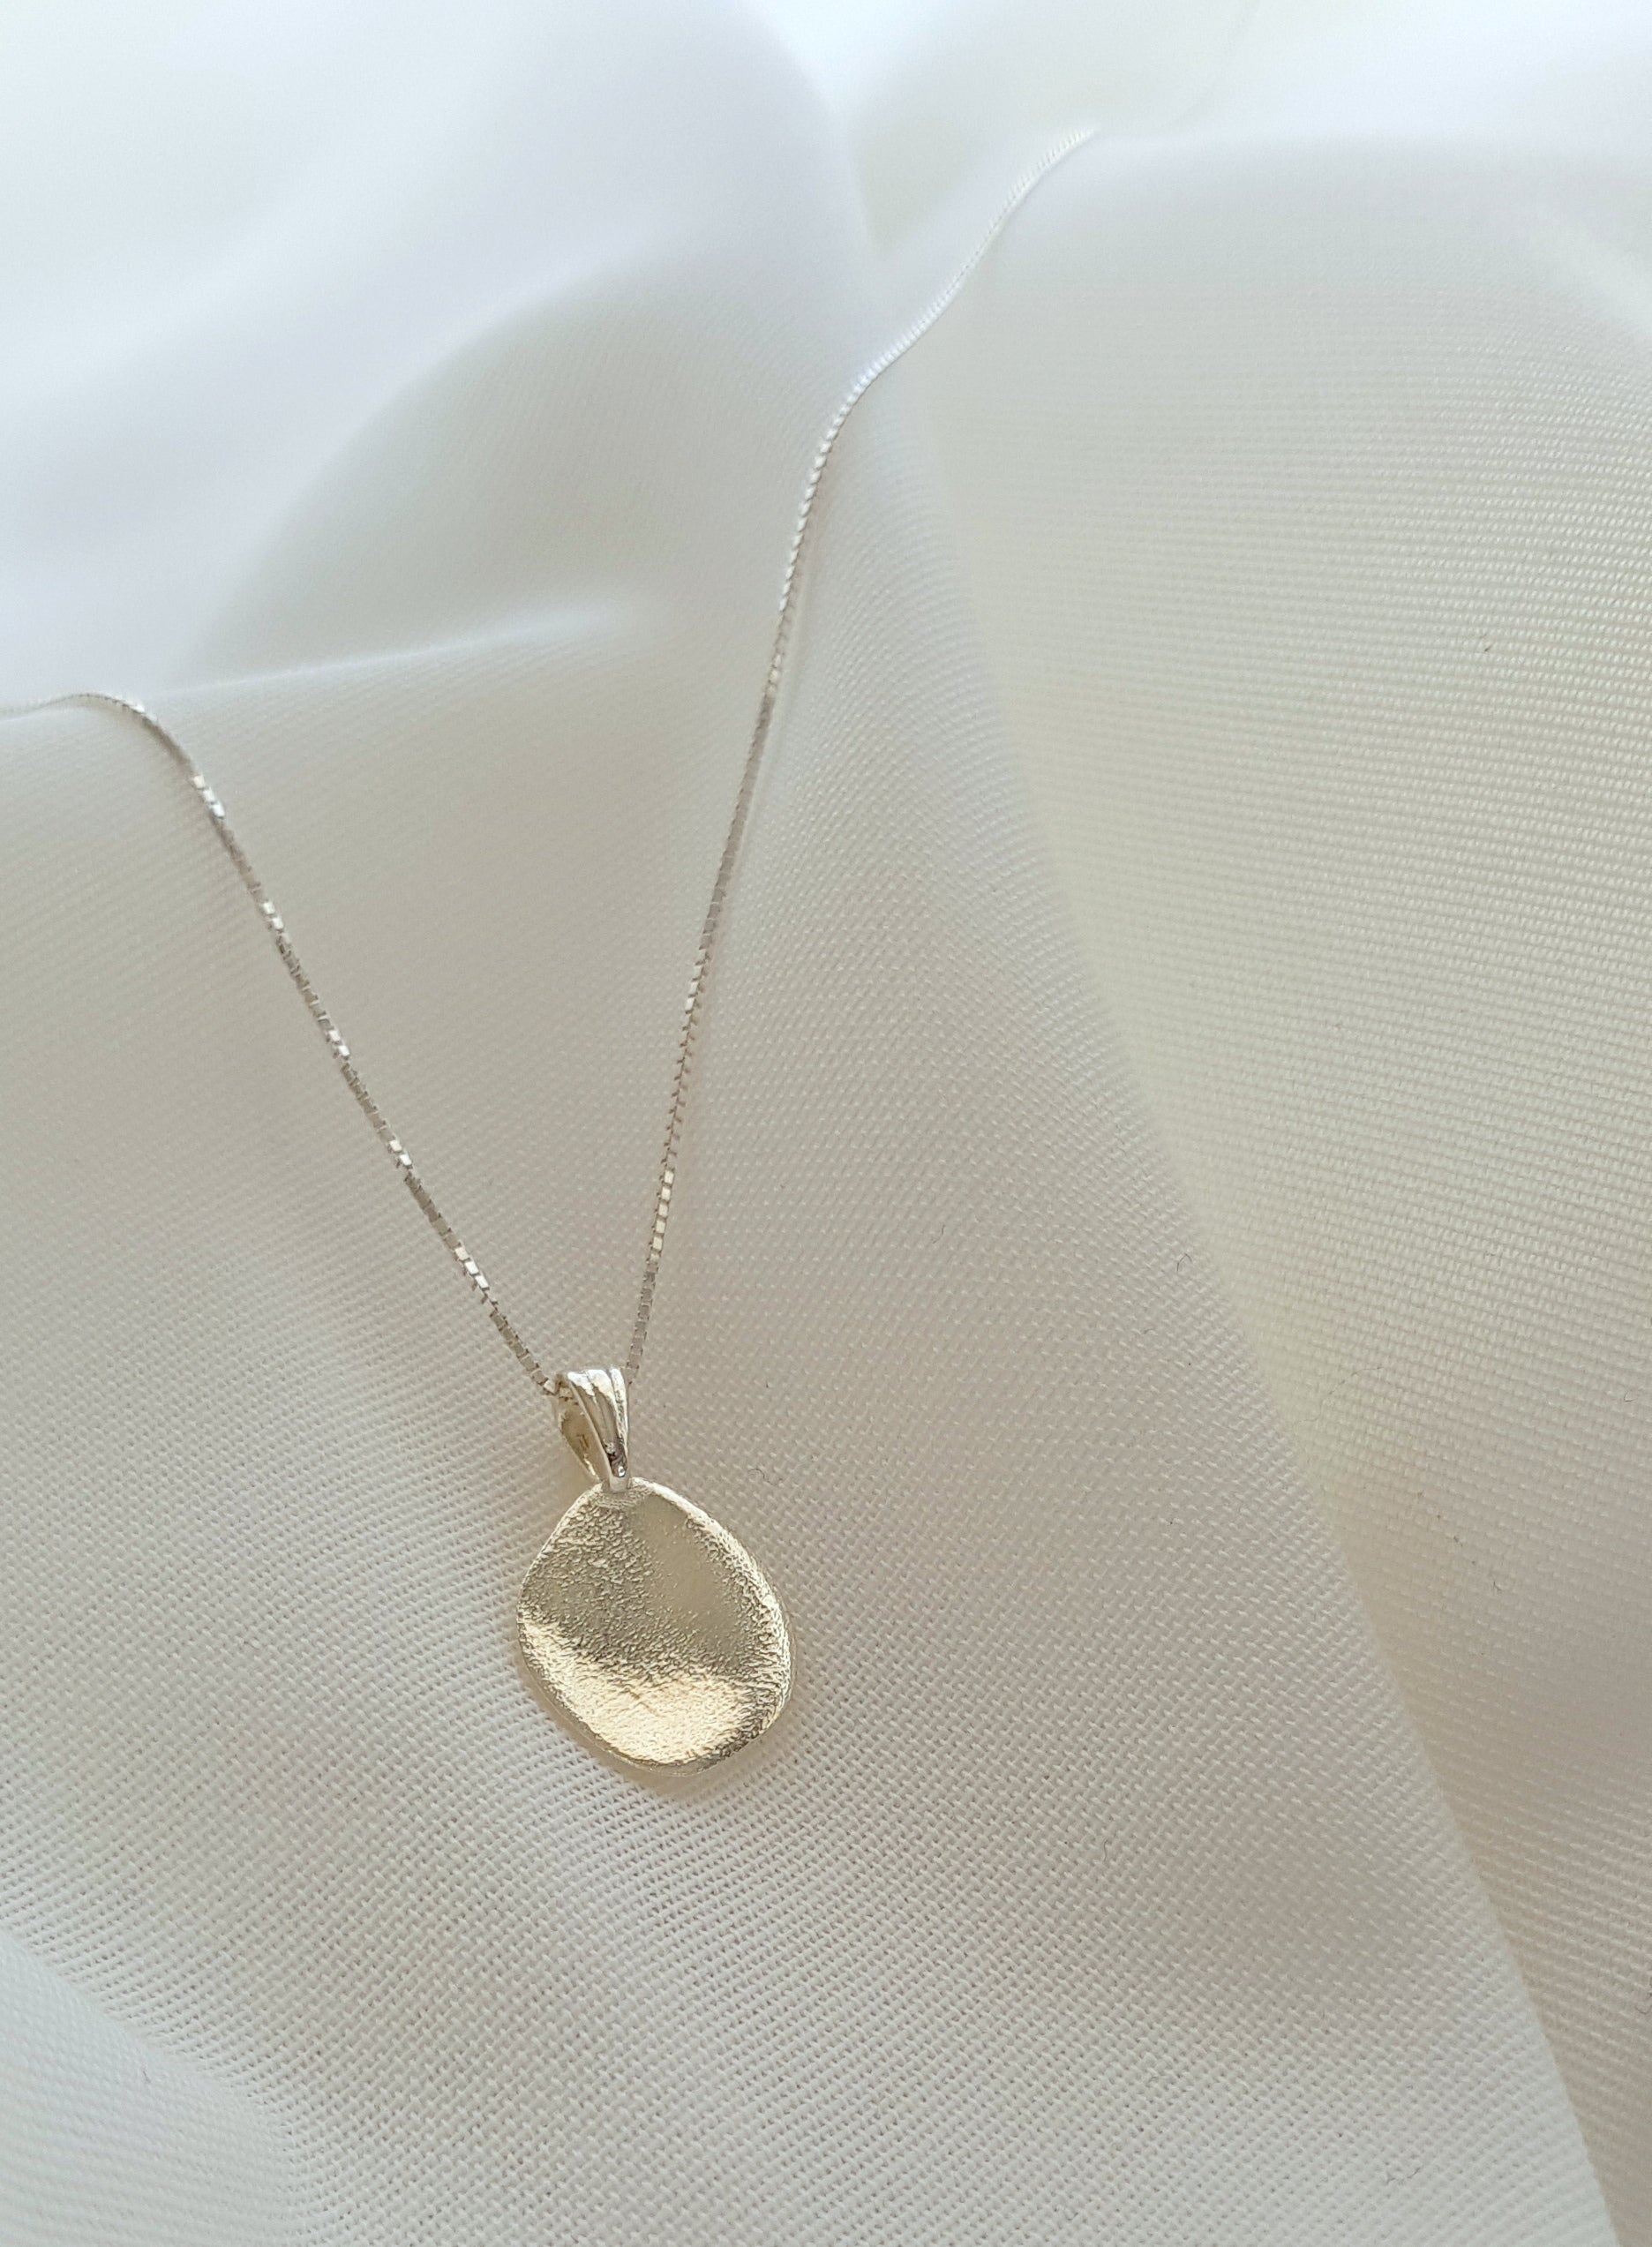 Organic Pendant Necklace | Gold pendant Necklace | Silver Pendant Necklace - AlmaJewelryShop Online boutique for gold and silver jewelry 